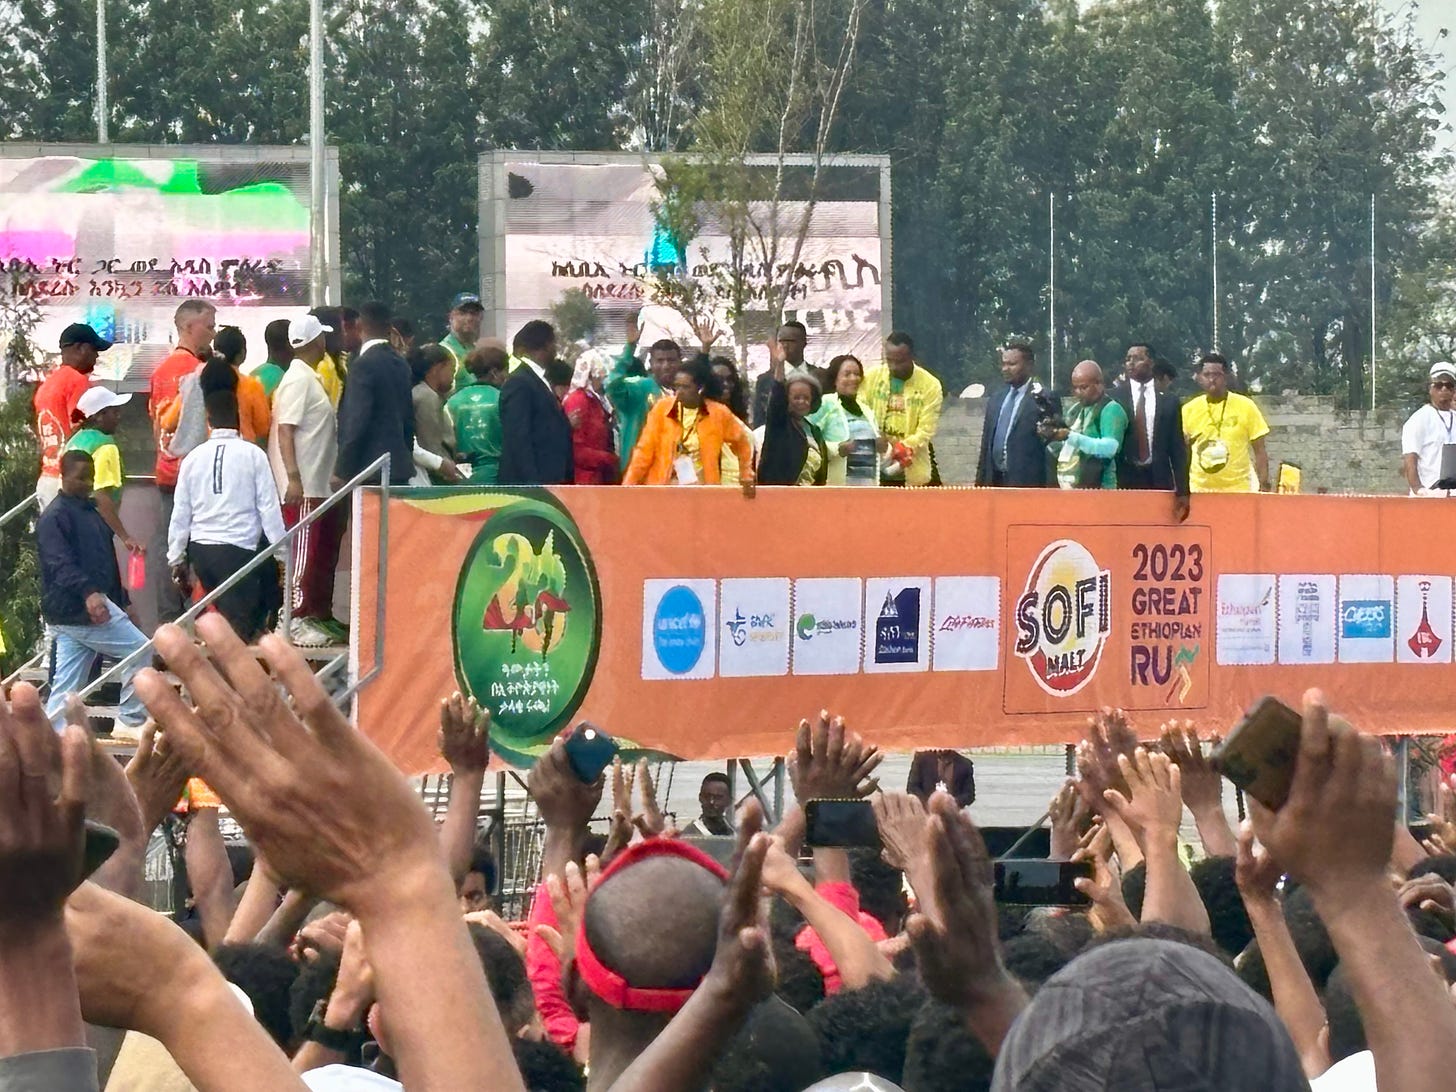 Dignitaries, including the President and Mayor, assembling at the start of the Great Ethiopian run.